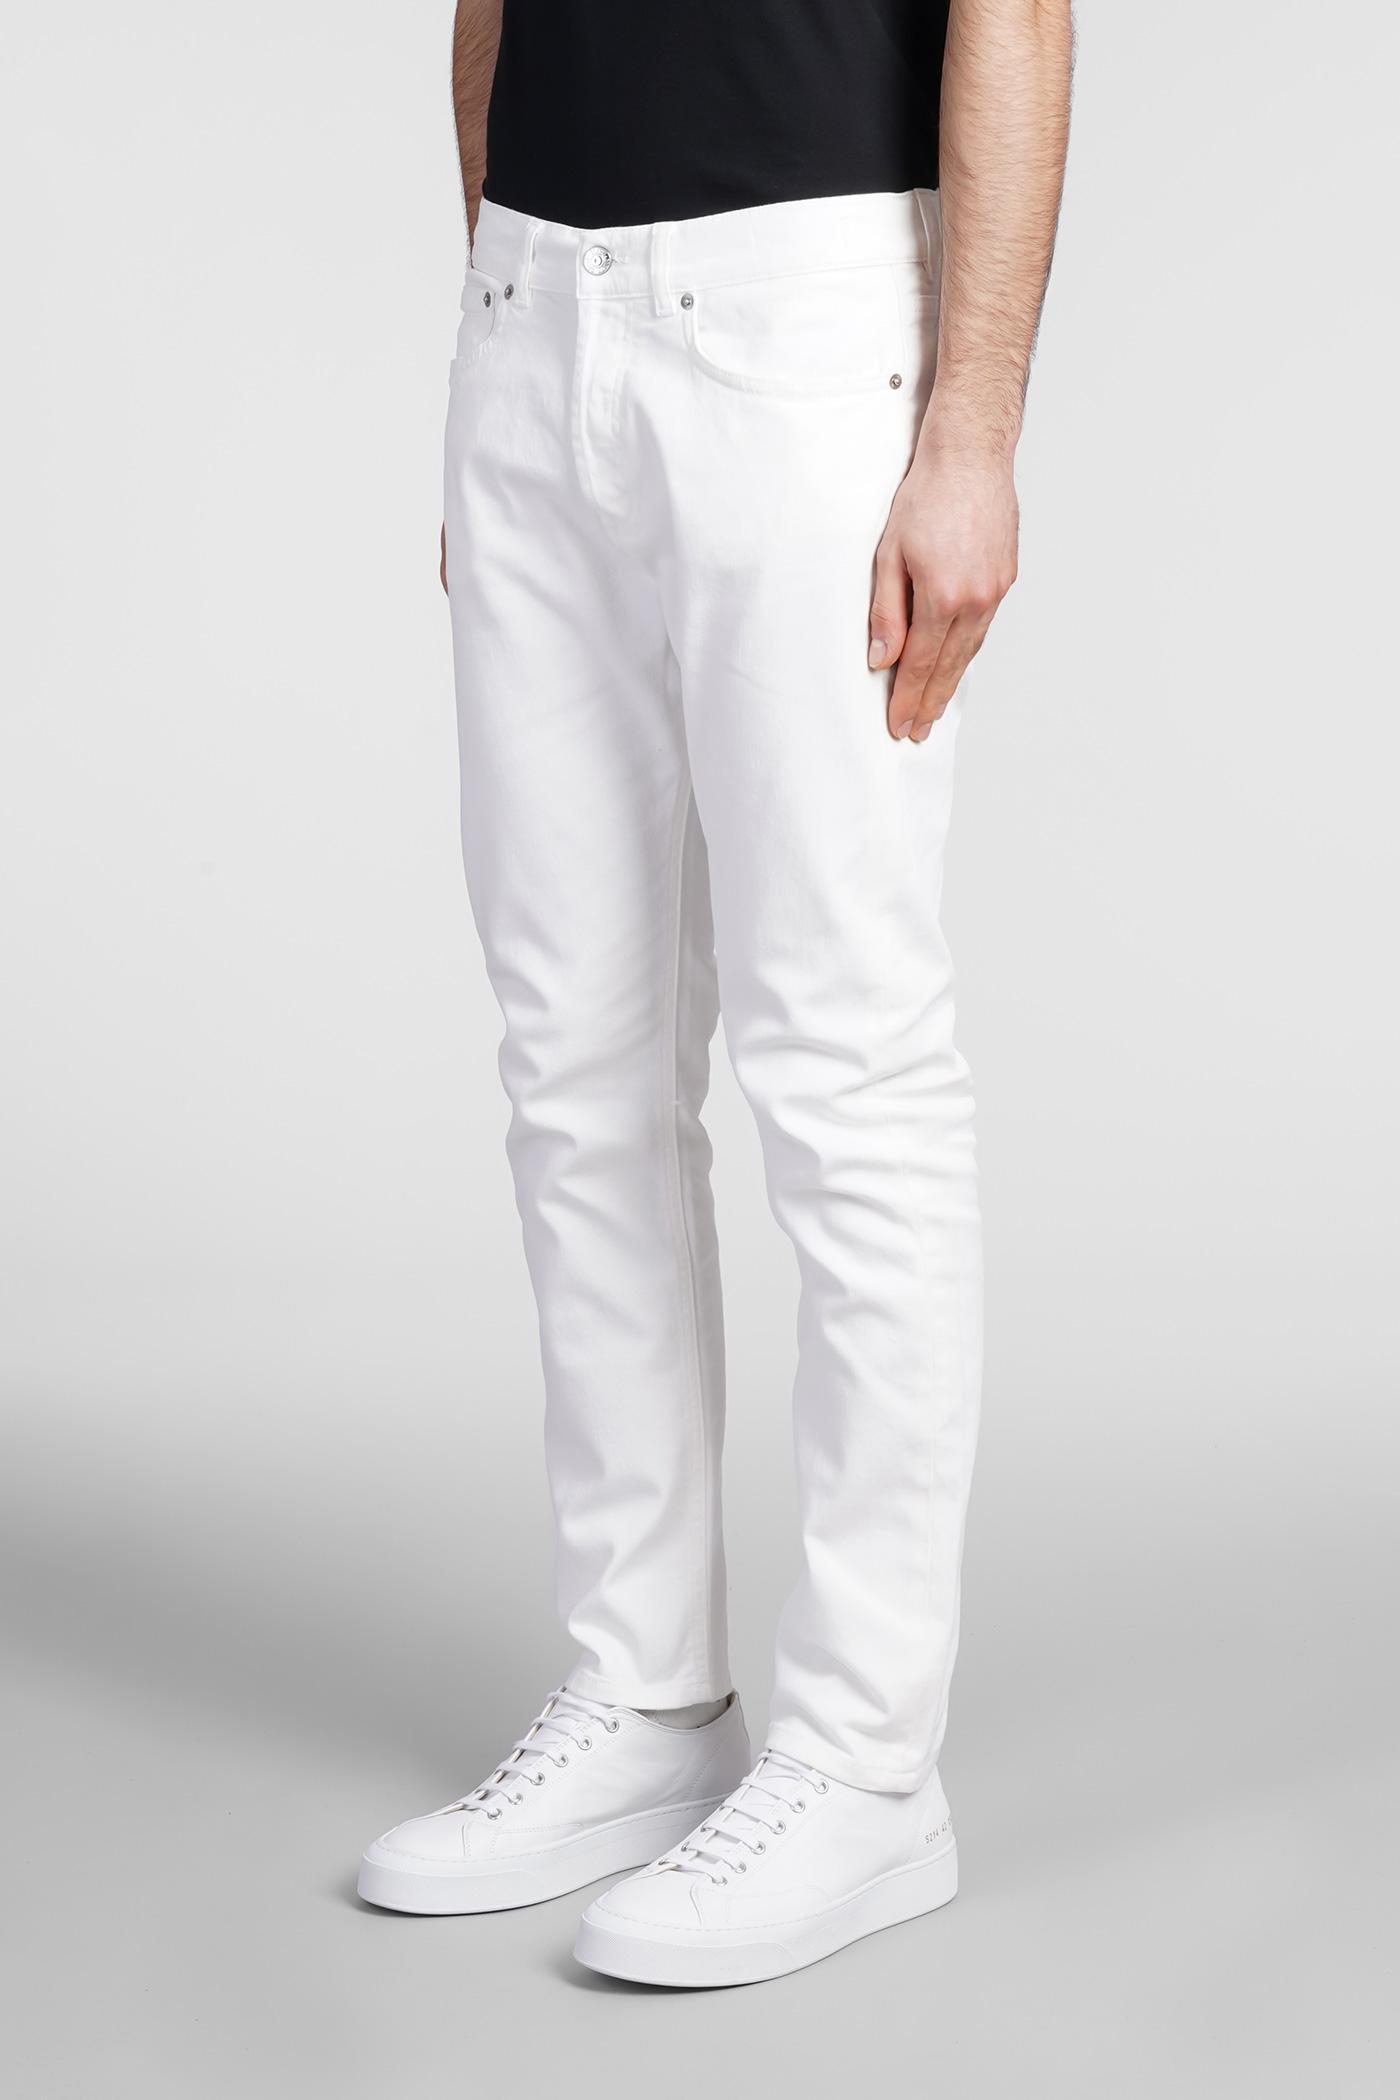 Grifoni Jeans In White Cotton for Men | Lyst